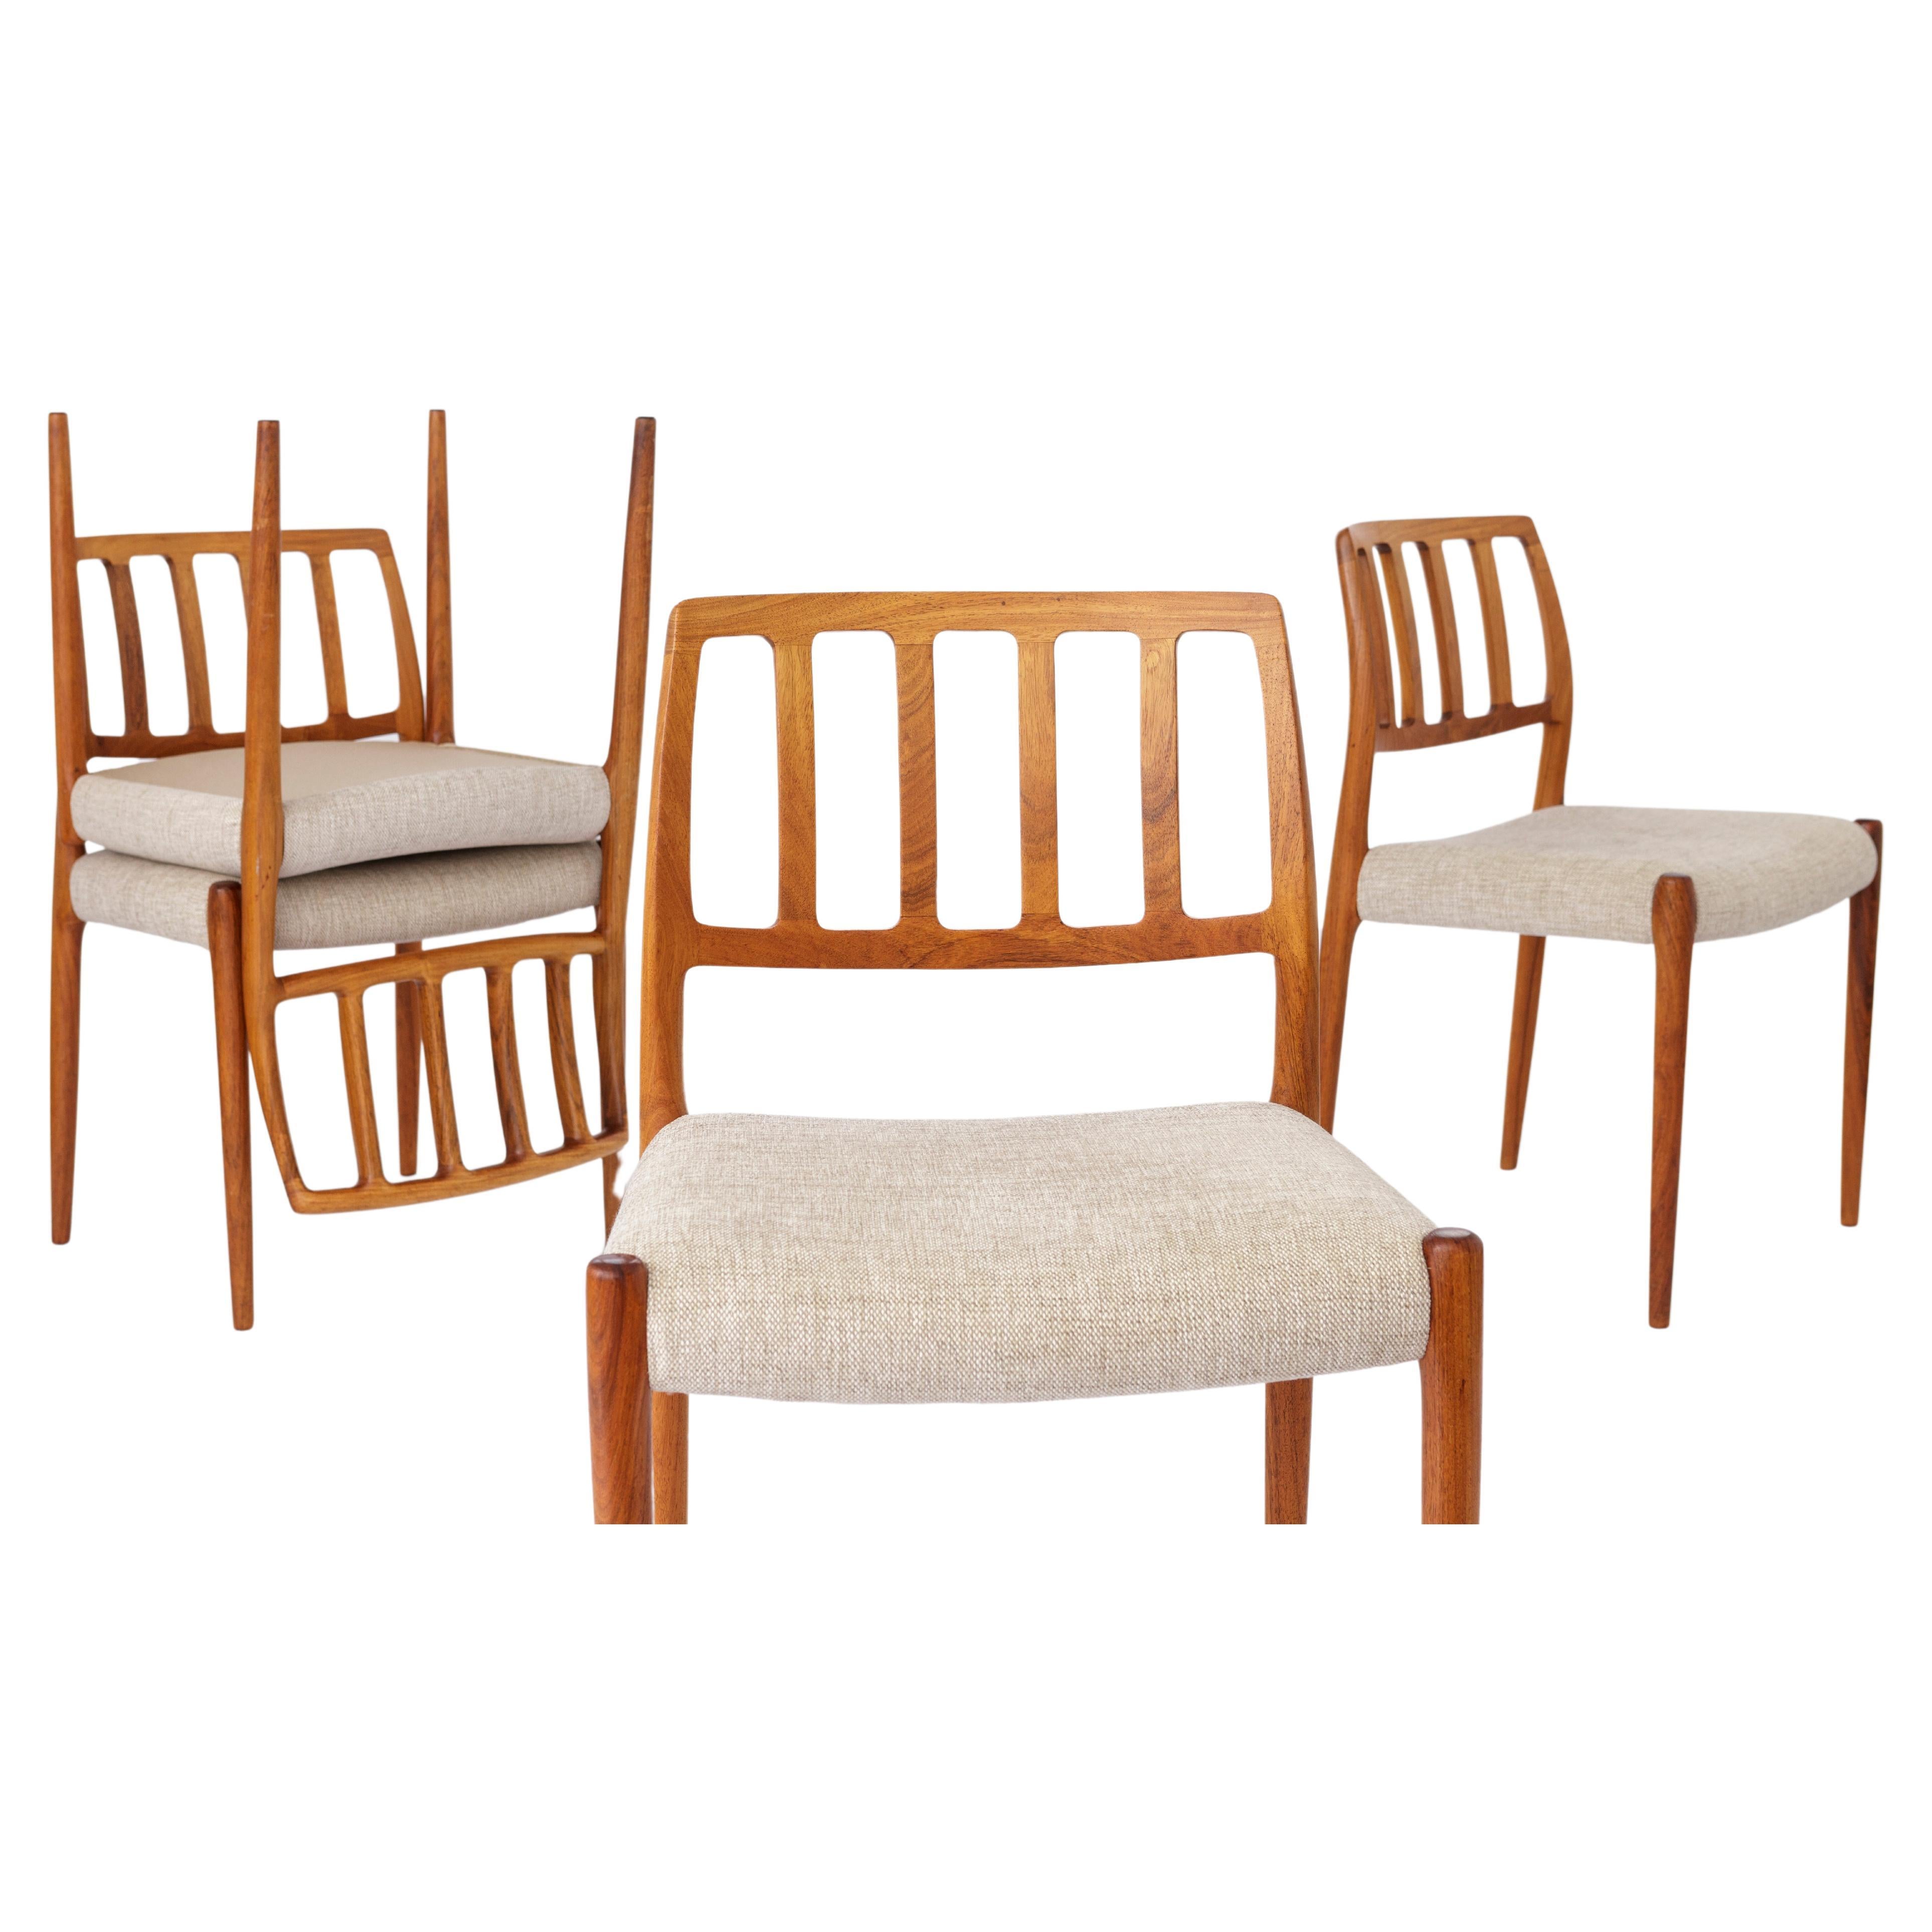 4 Niels Moller Chairs, model 83, 1970s, Rosewood, Danish, Vintage For Sale